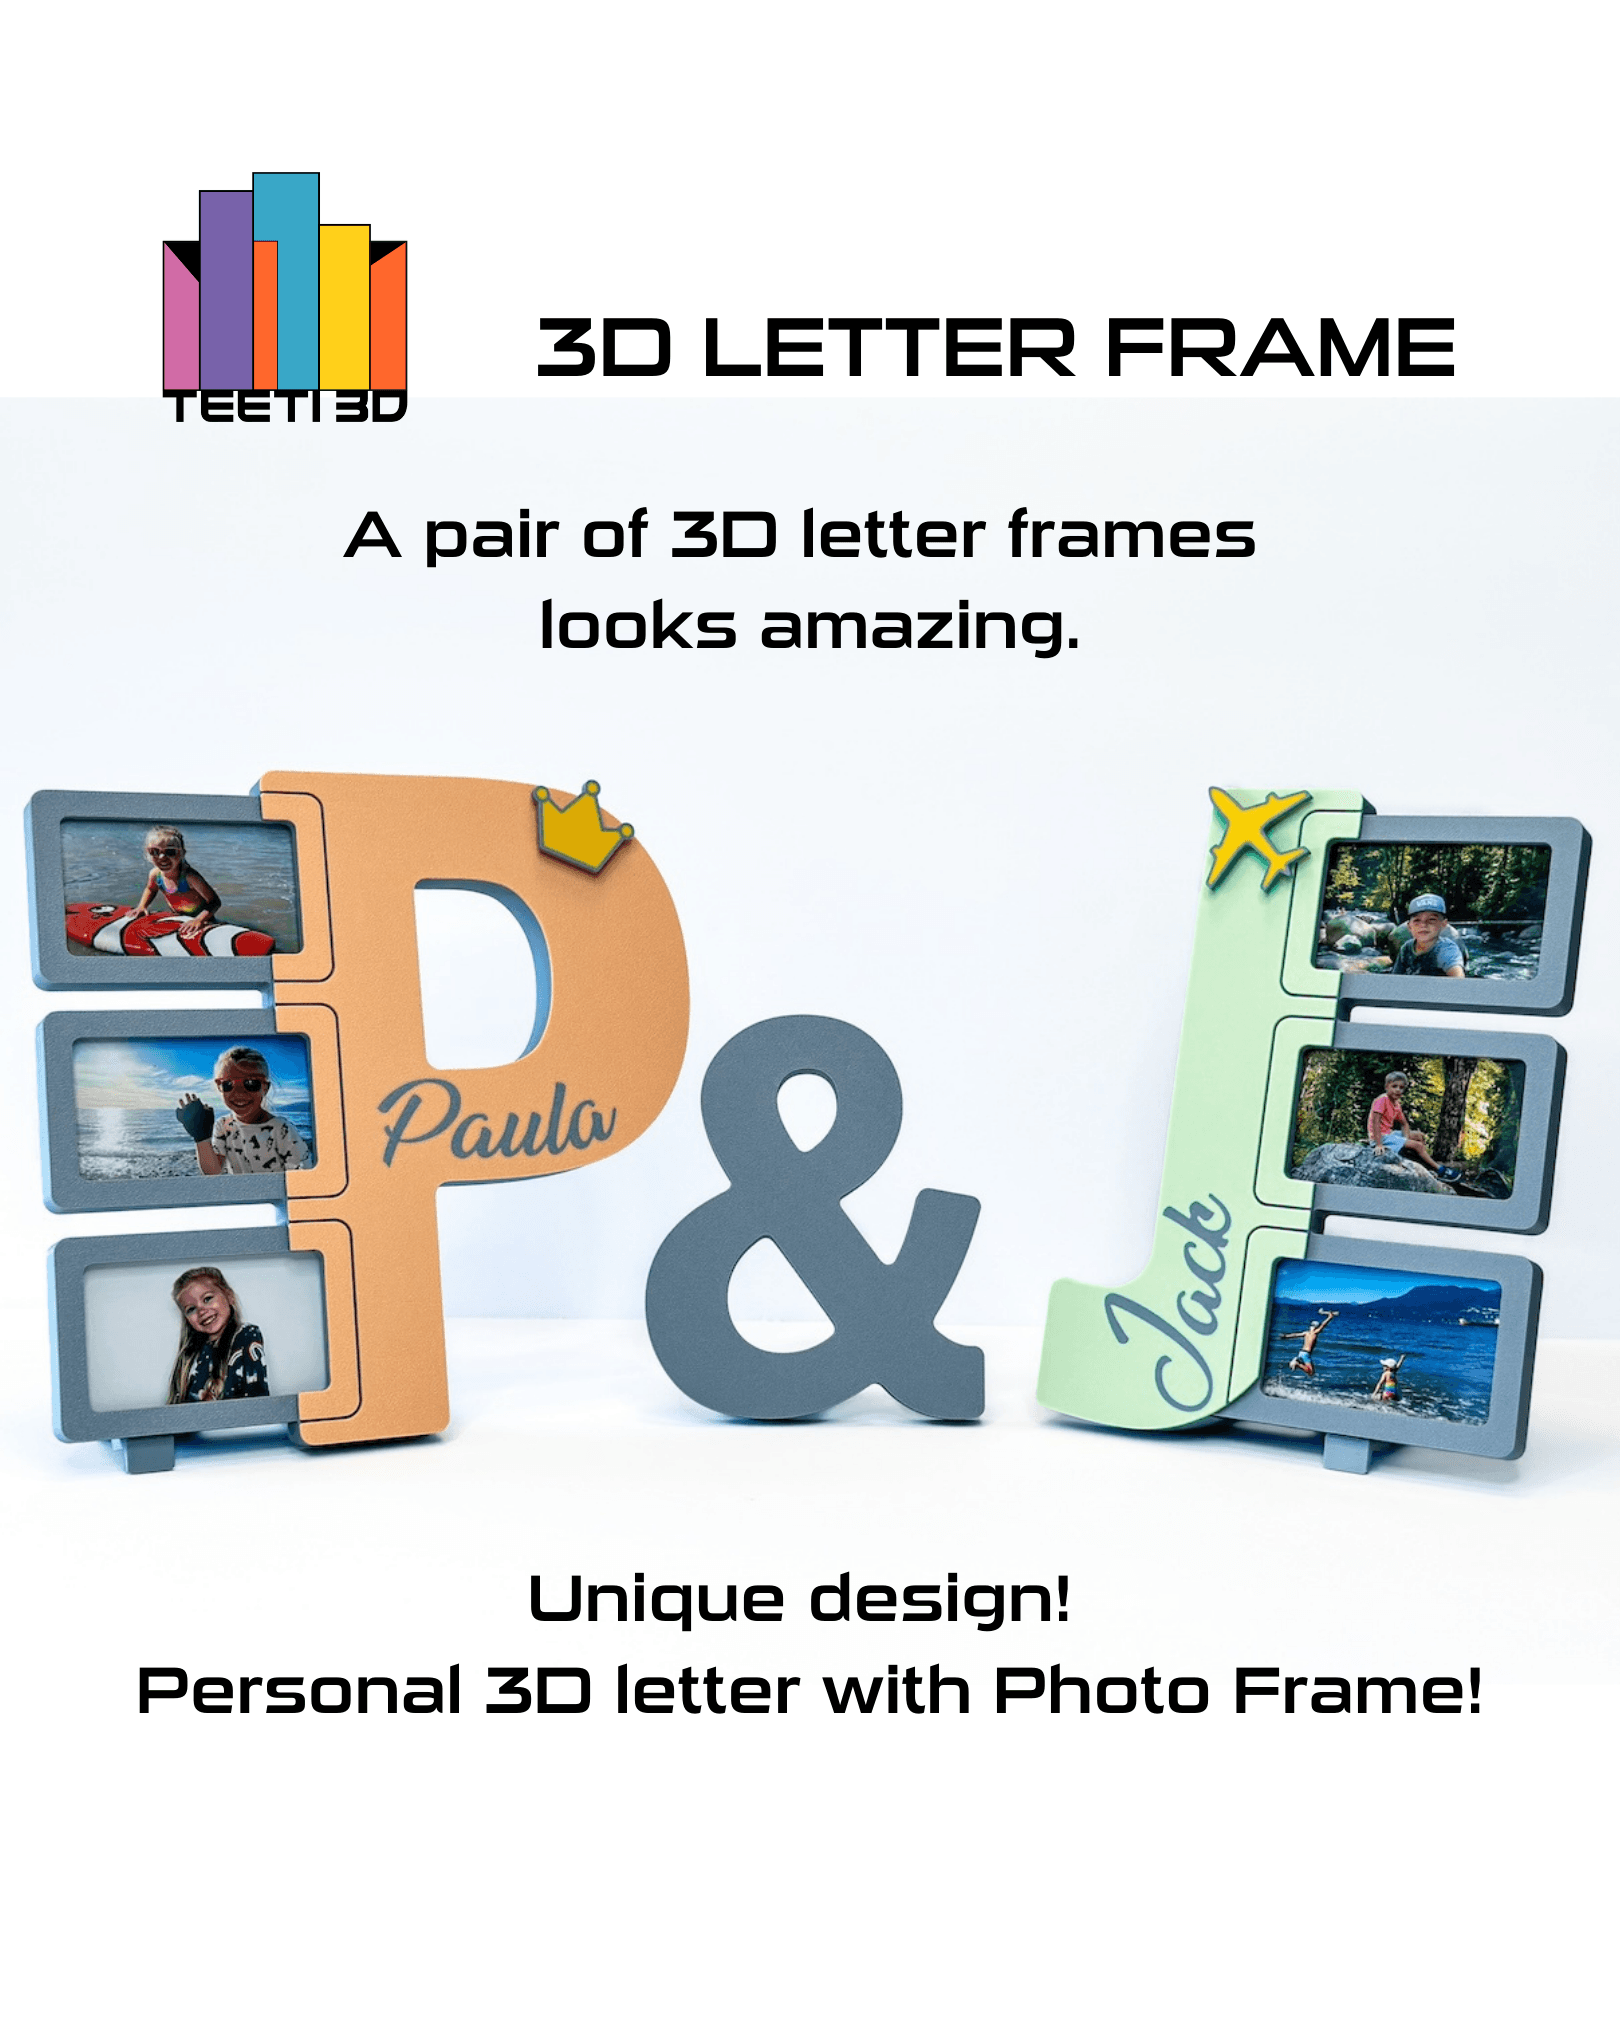 3D Letter "F" with Photo Frame 3d model